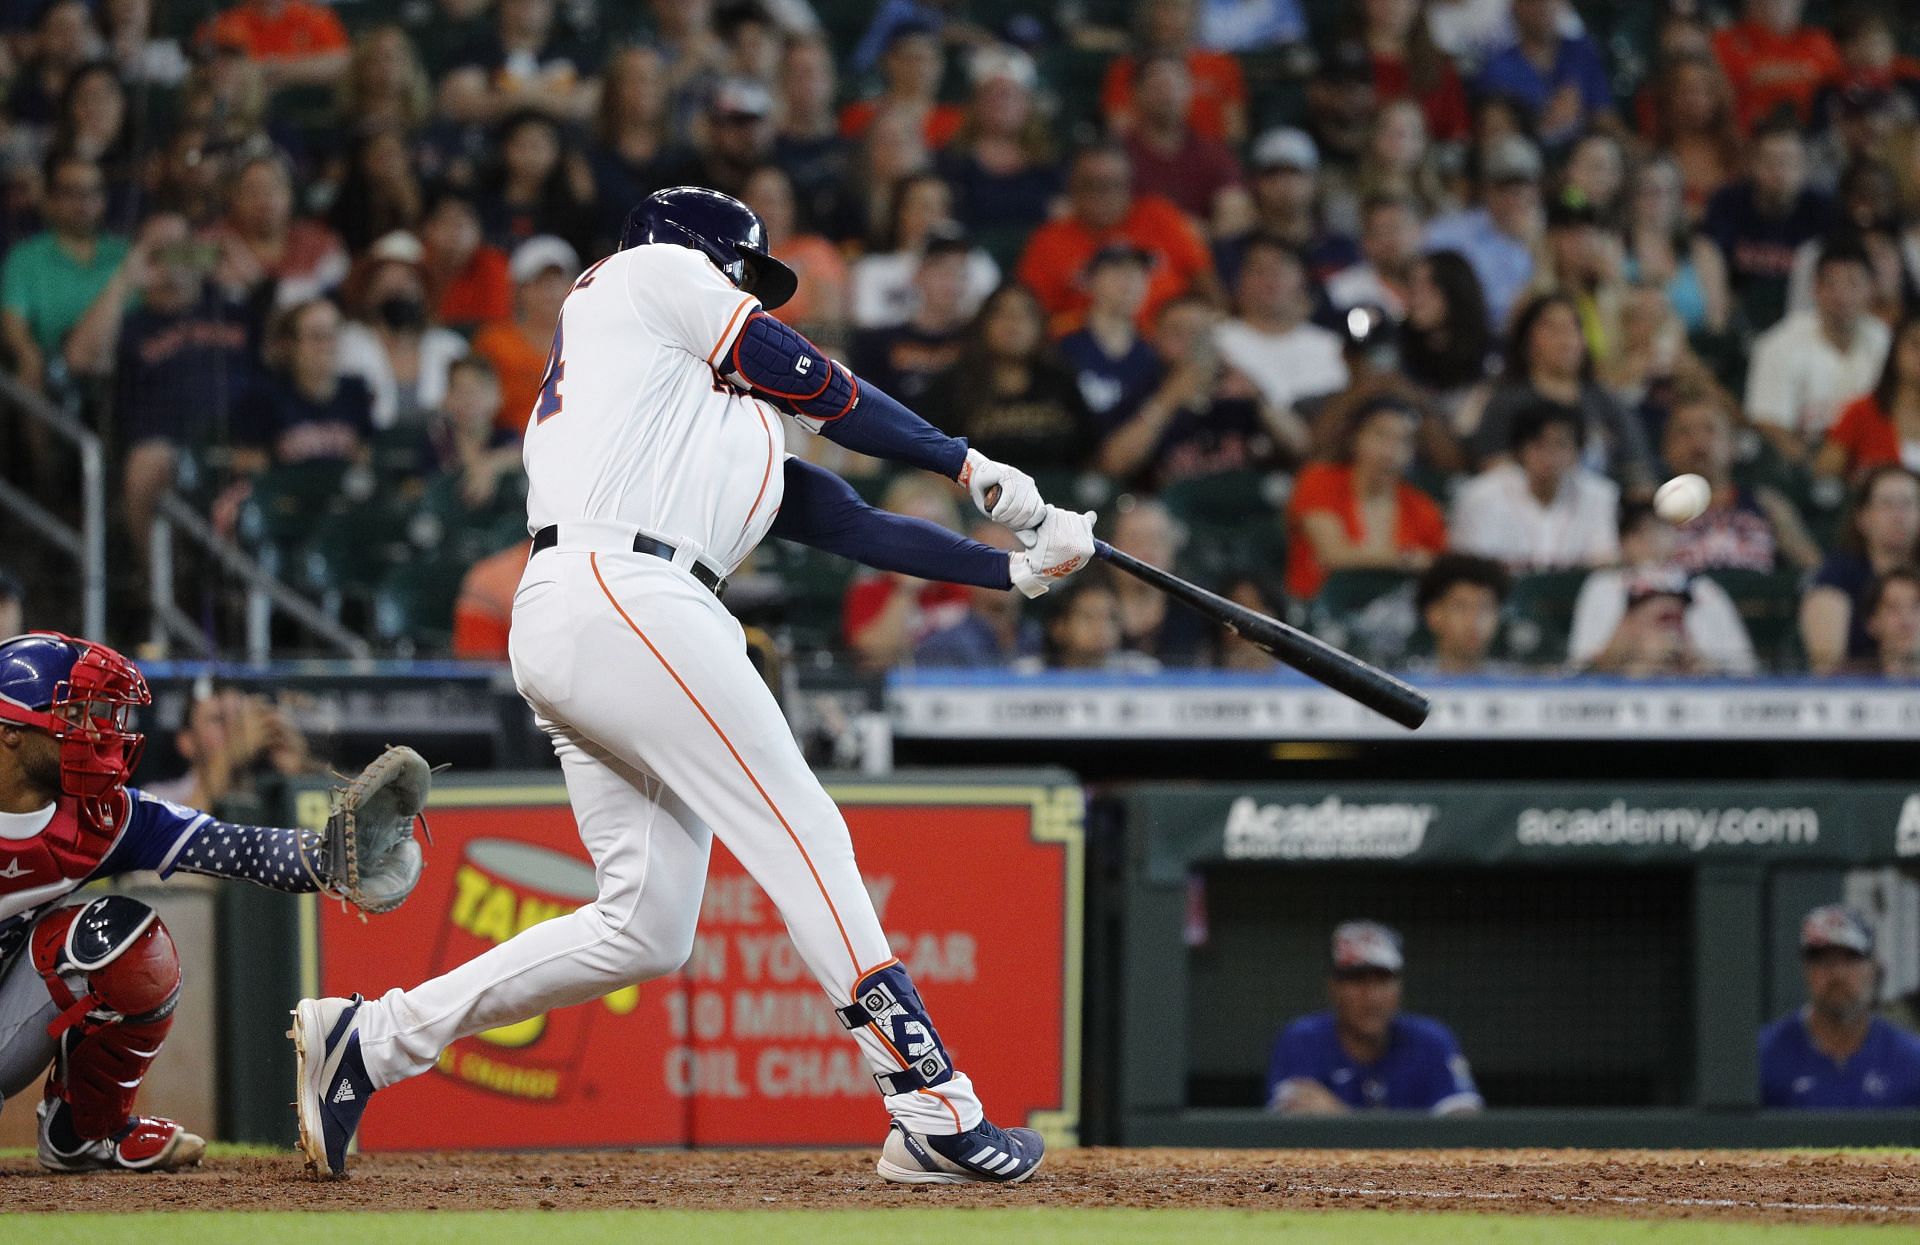 The Astros defeated the Royals with this swing.